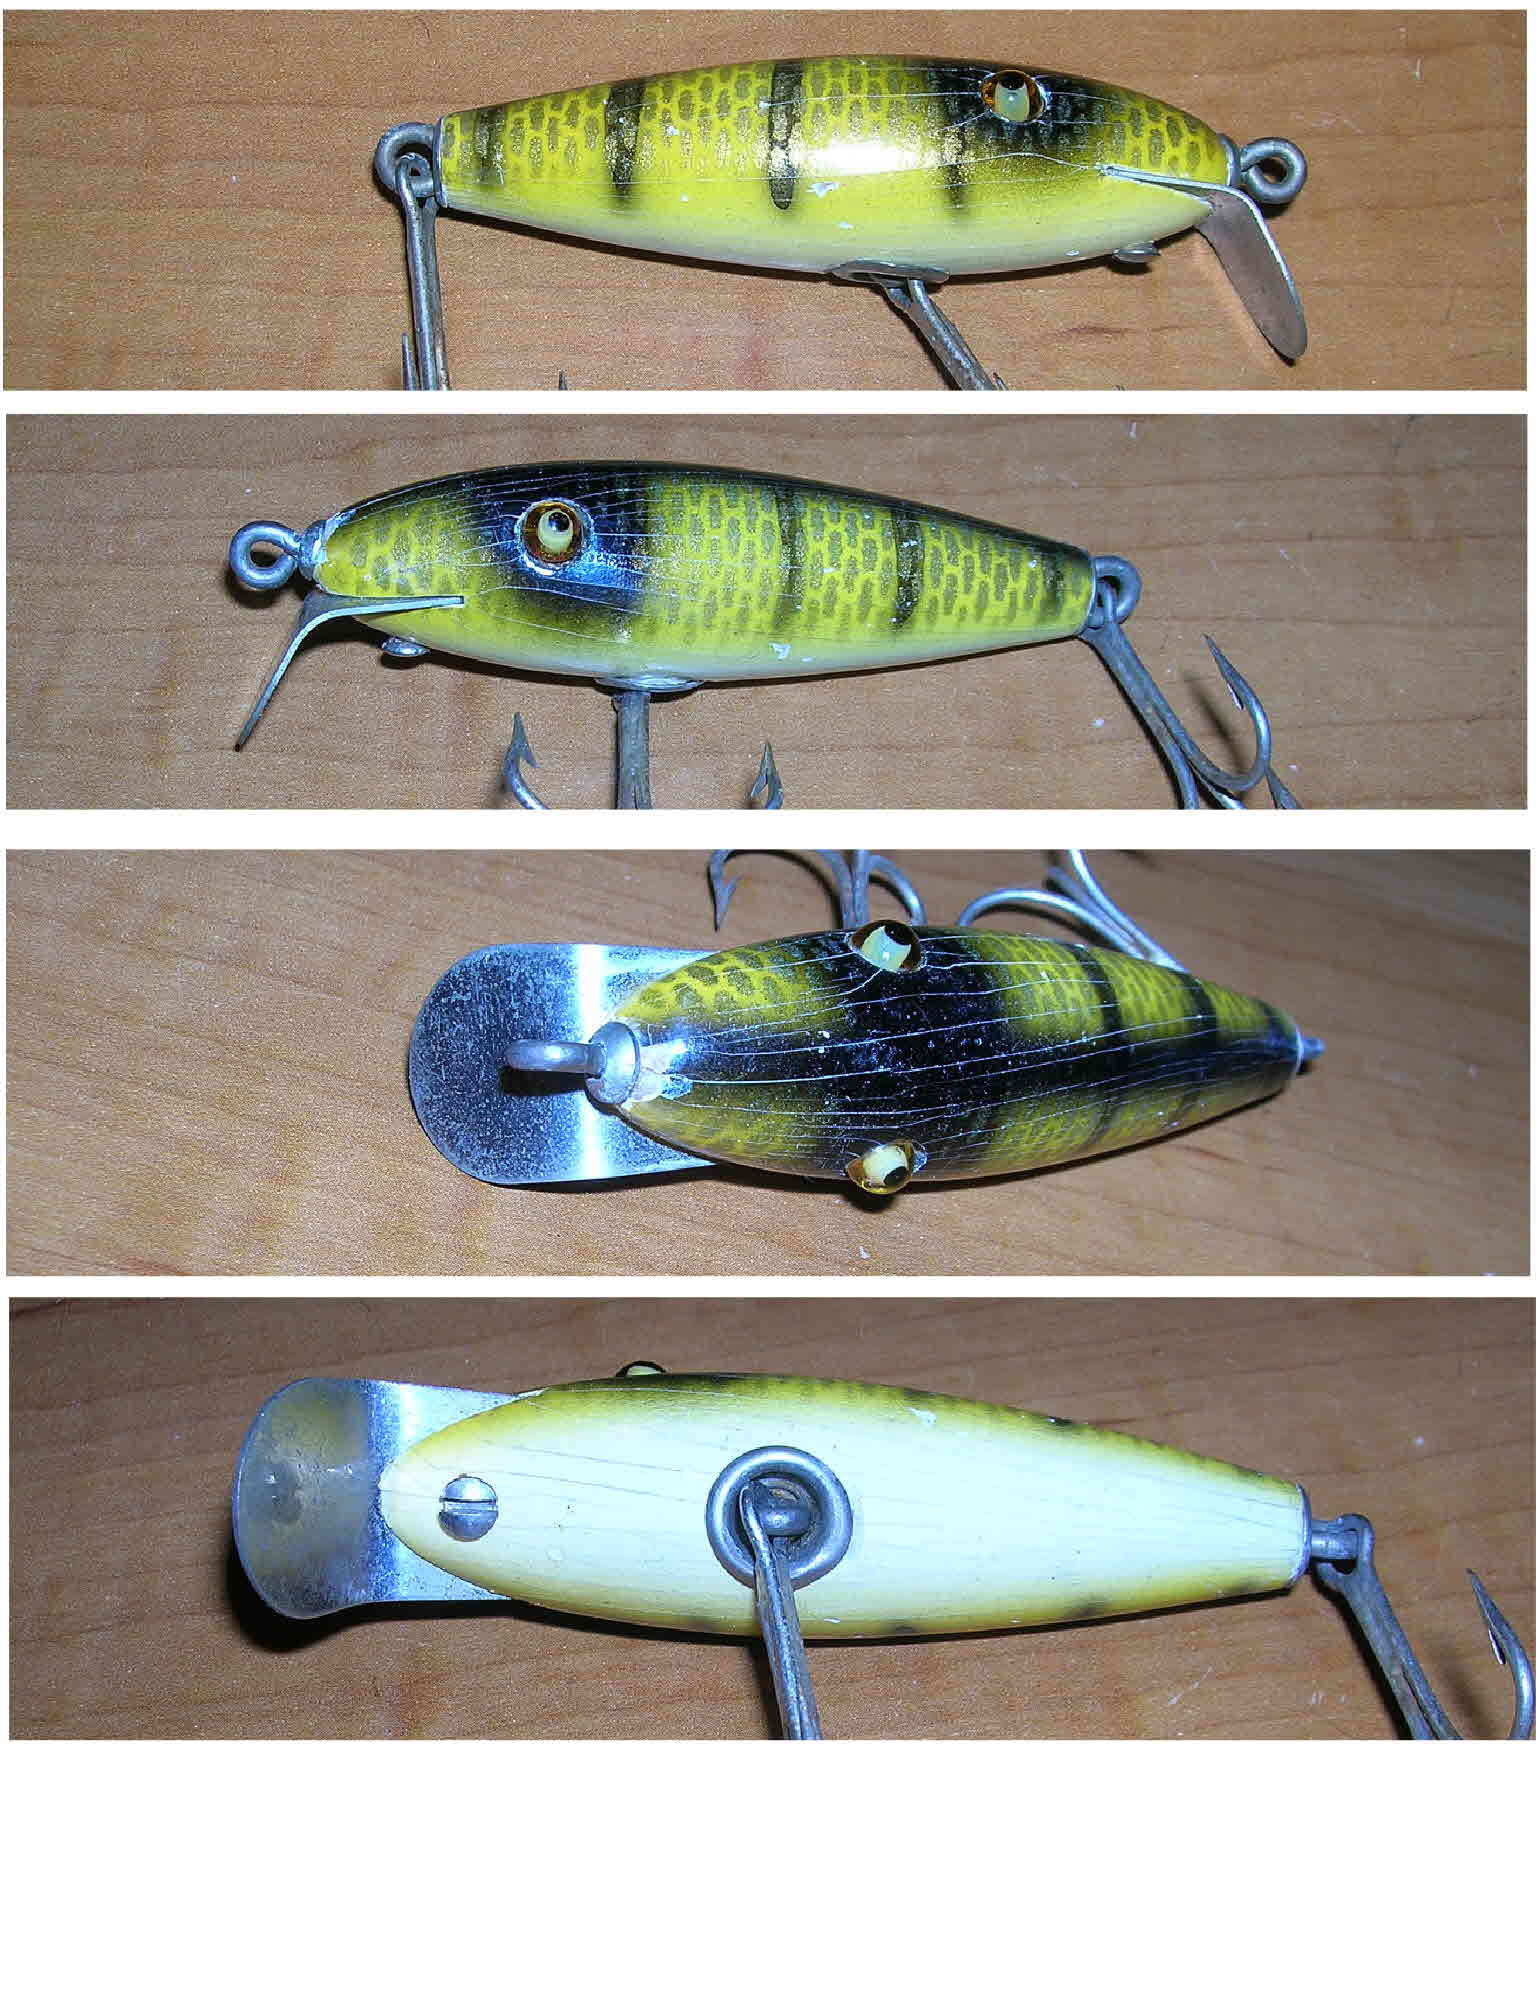 Creek Chub Darter Lure, Winged, Rare, Vintage, Collectible, One of a kind?